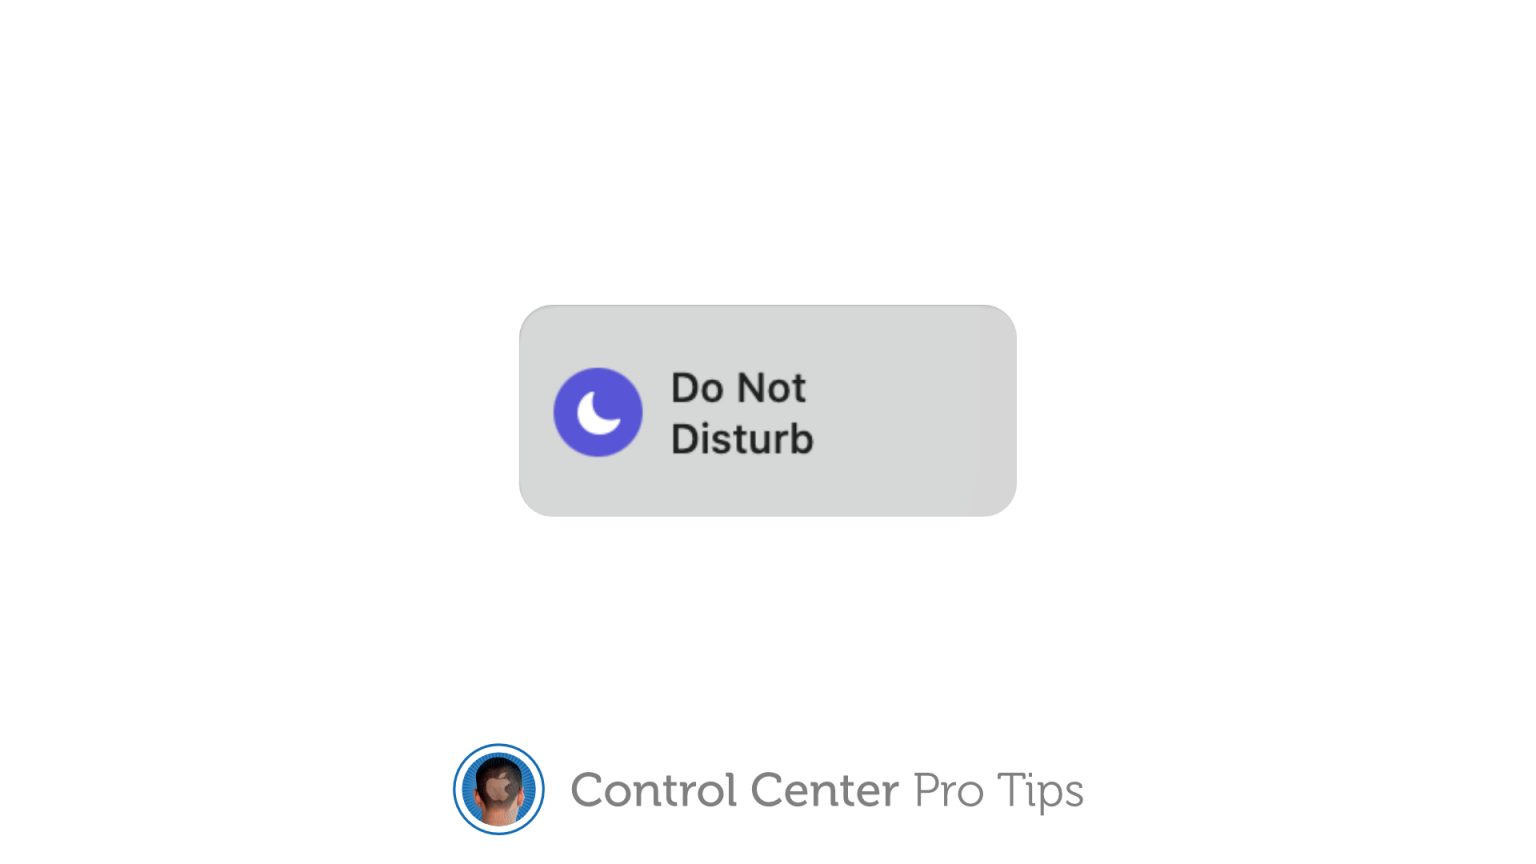 Toggle Do Not Disturb in Control Center